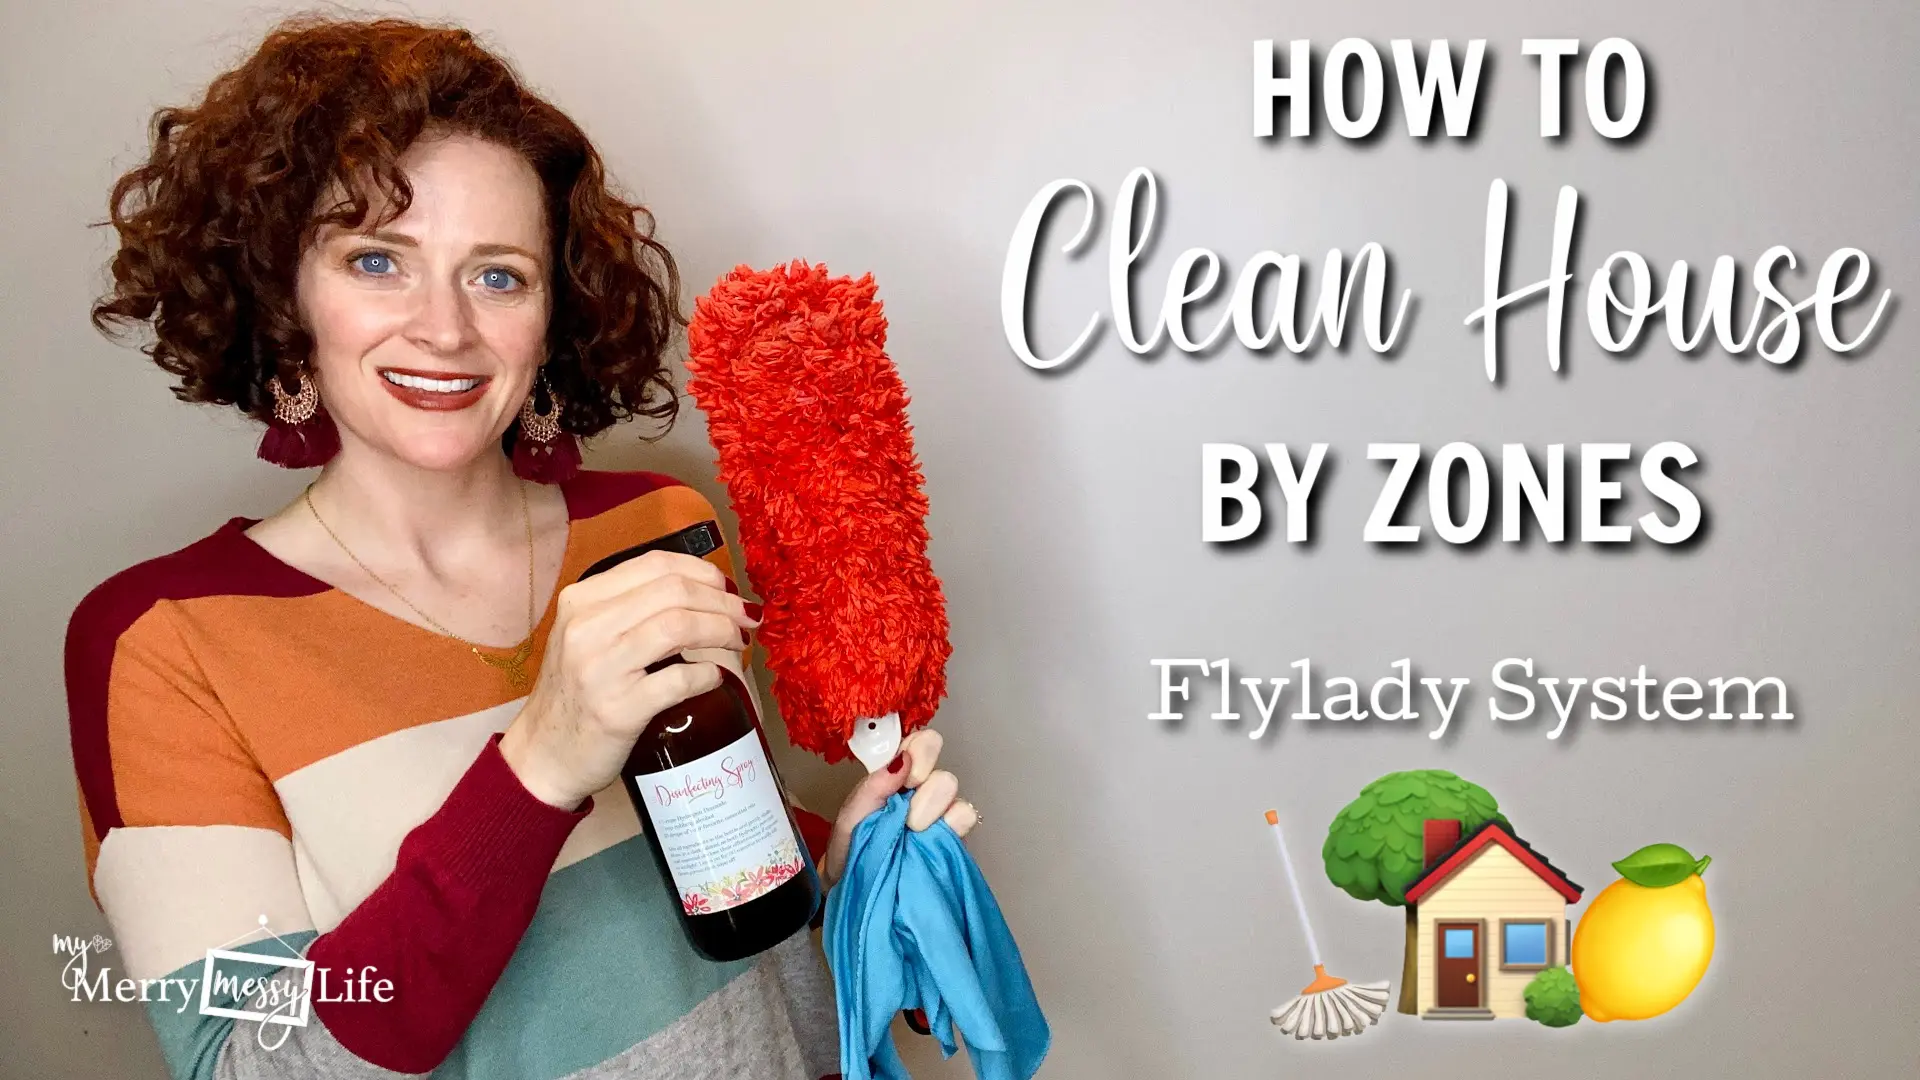 How to Clean House by Zones - an Intro to Flylady Zone Cleaning